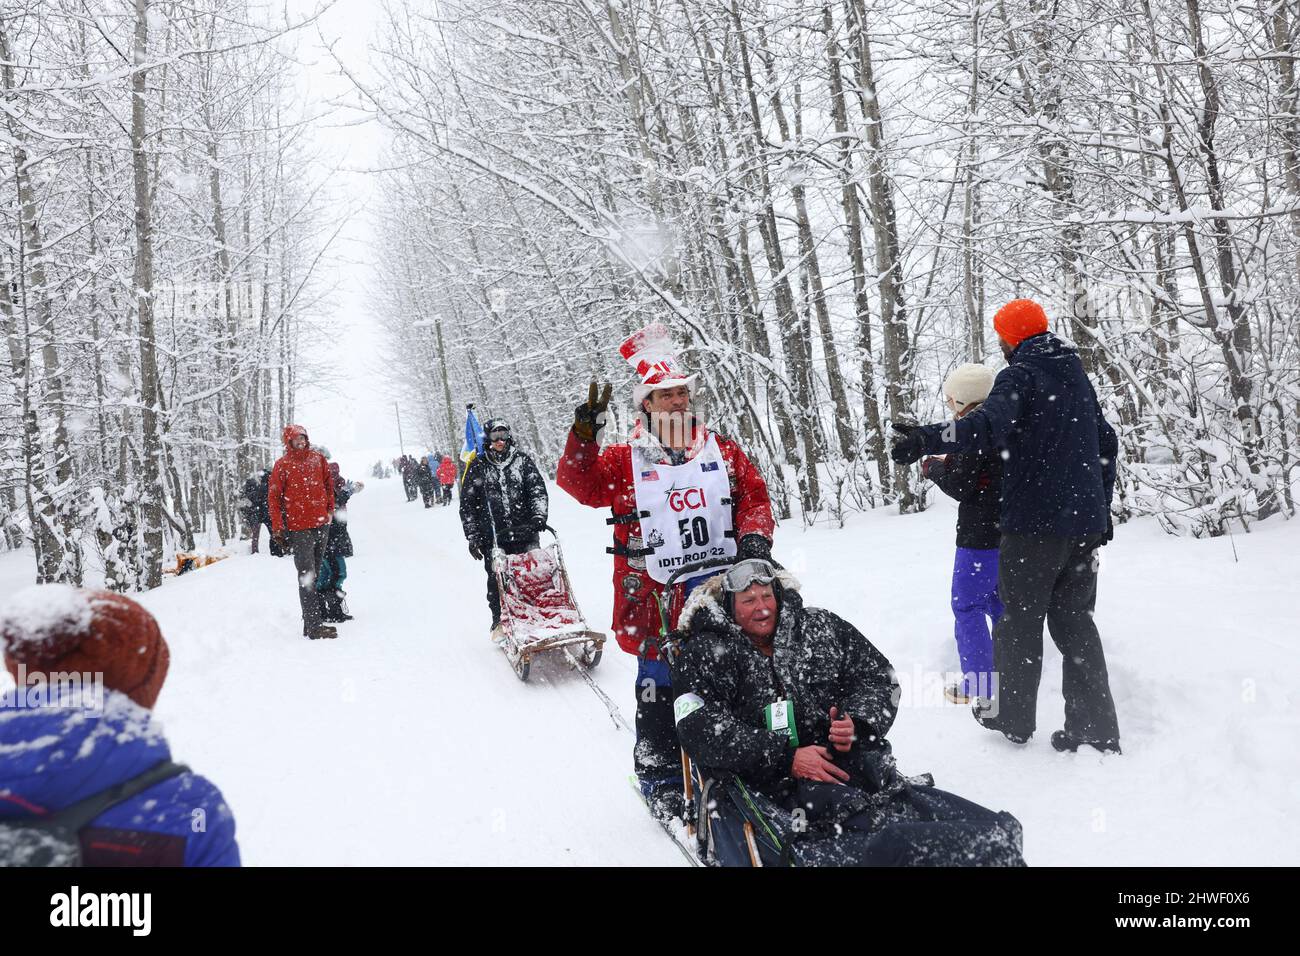 Hugh Neff during the ceremonial start the 50th Iditarod Trail Sled Dog Race in Alaska, U.S. March 5, 2022. REUTERS/Kerry Tasker Stock Photo - Alamy